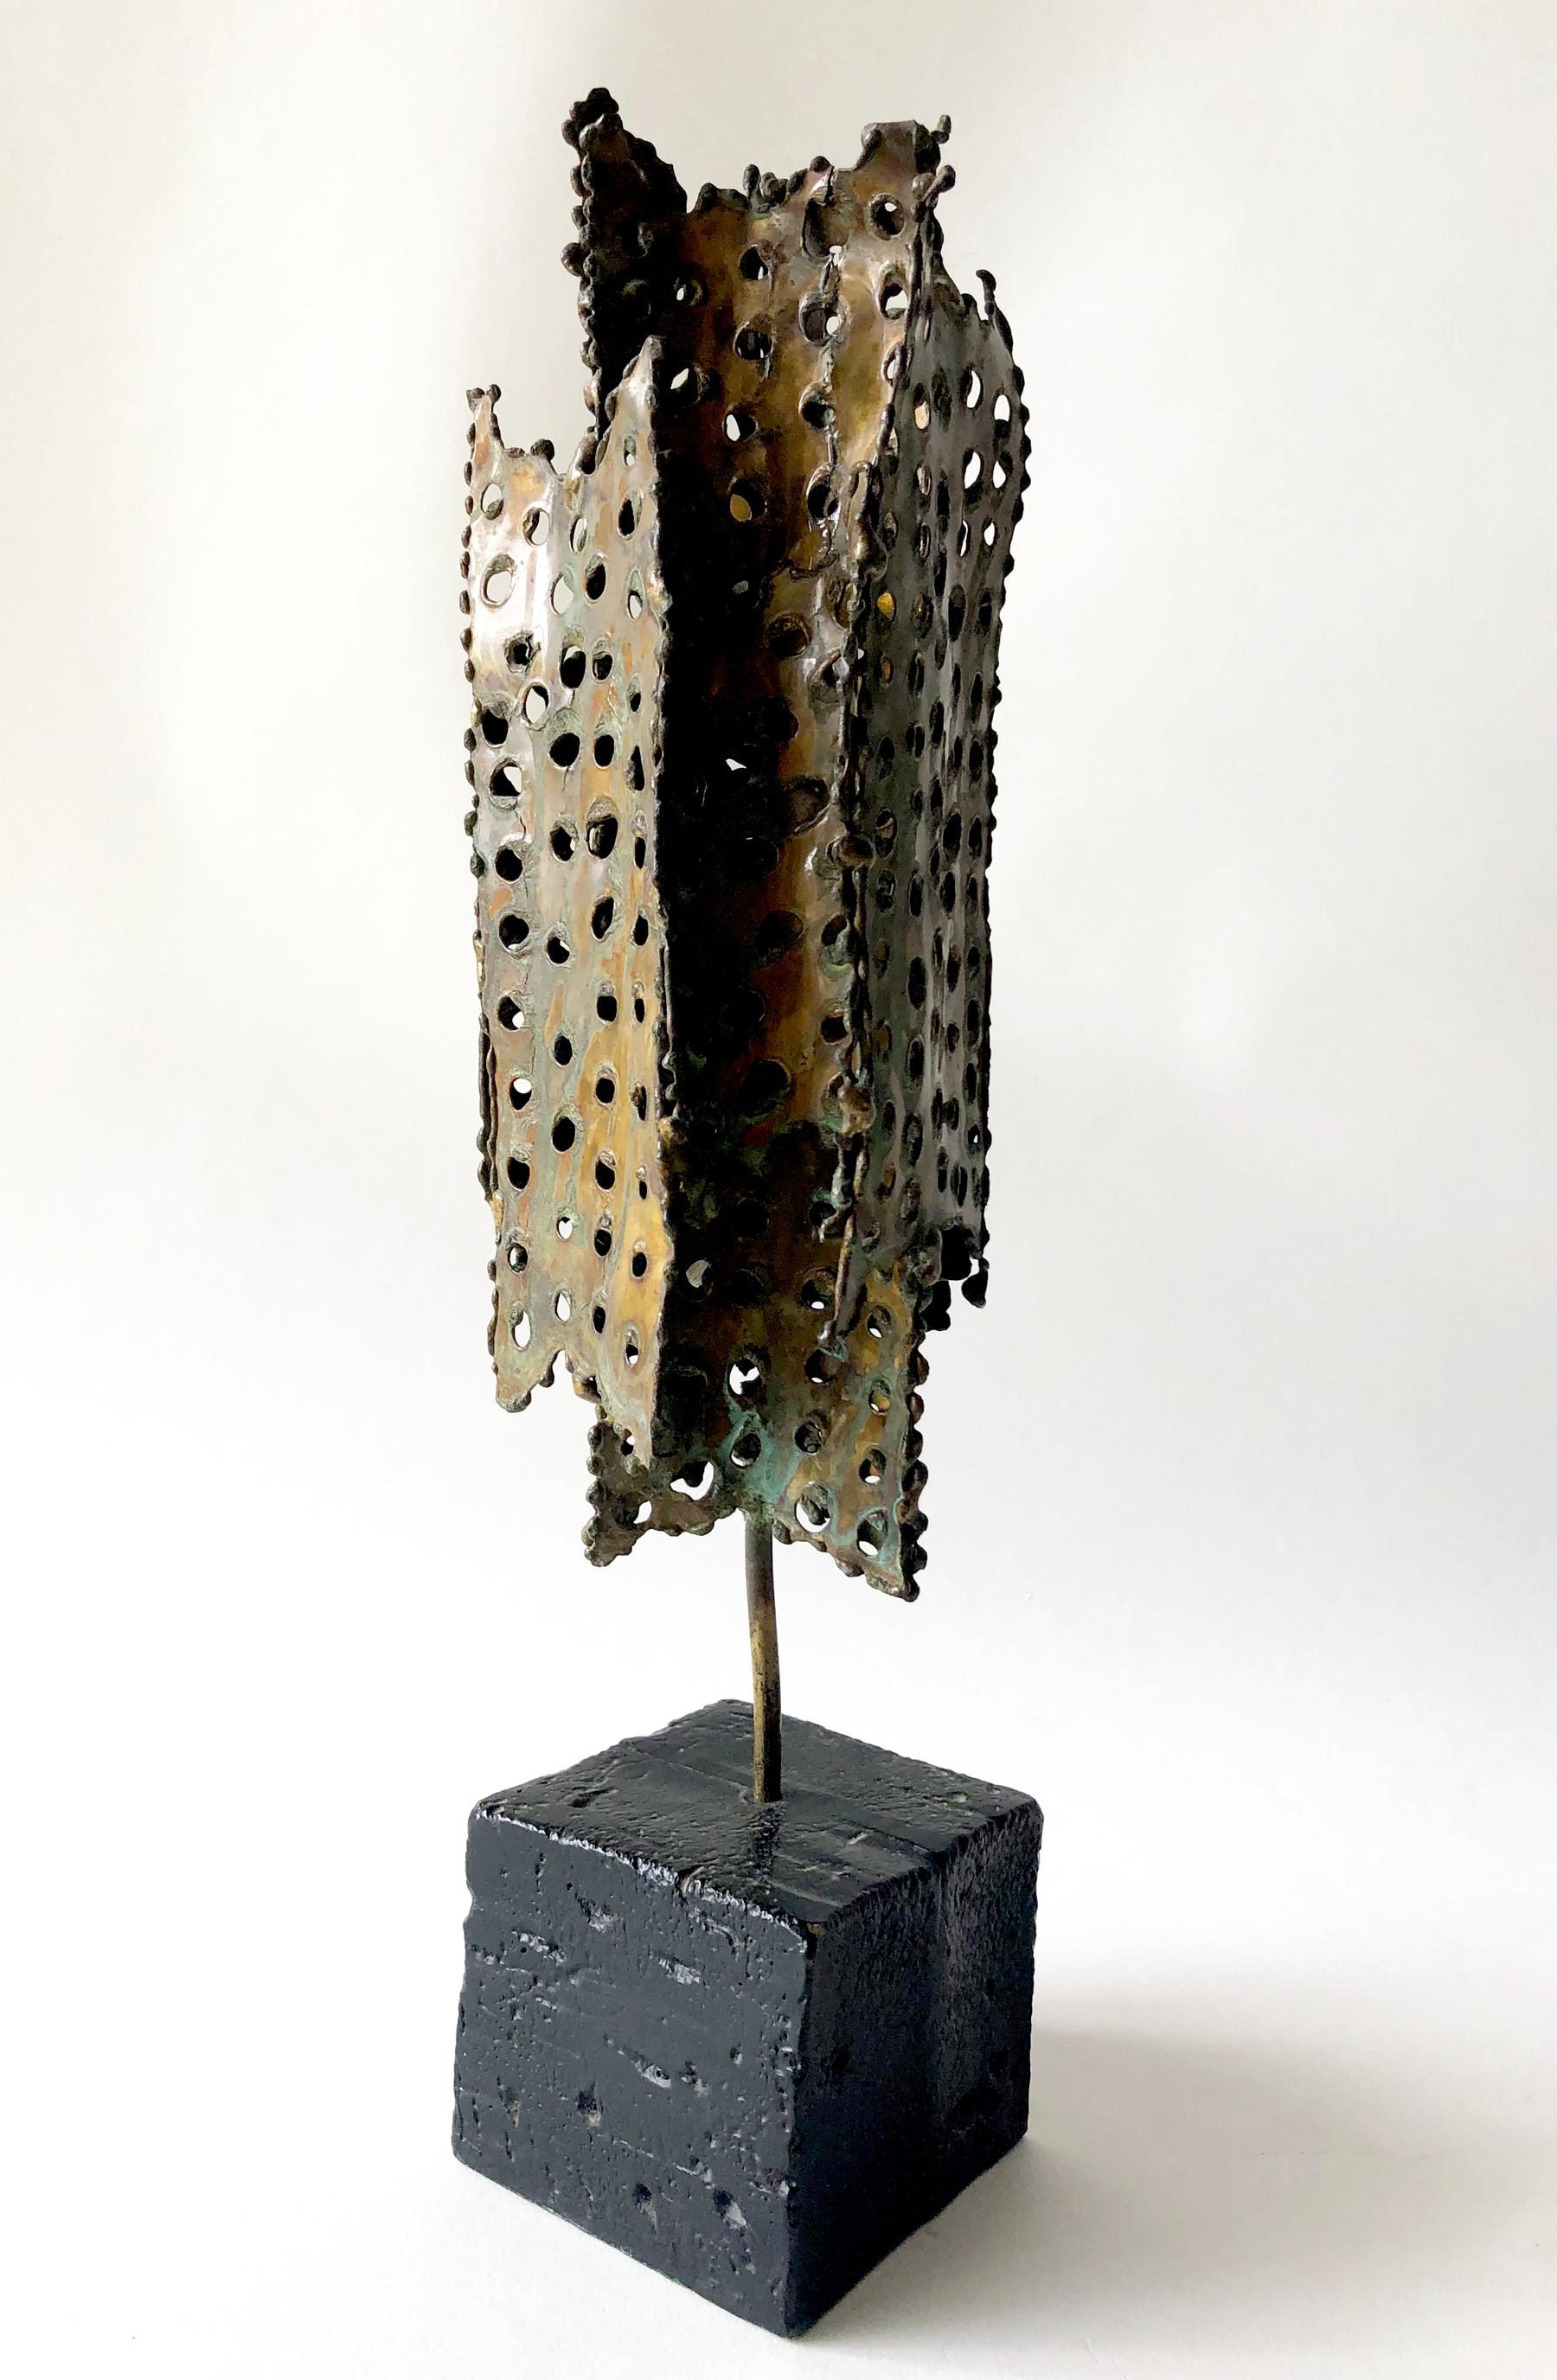 Perforated metal sculpture by Tom Greene, circa 1960s. Sculpture measures 13.5